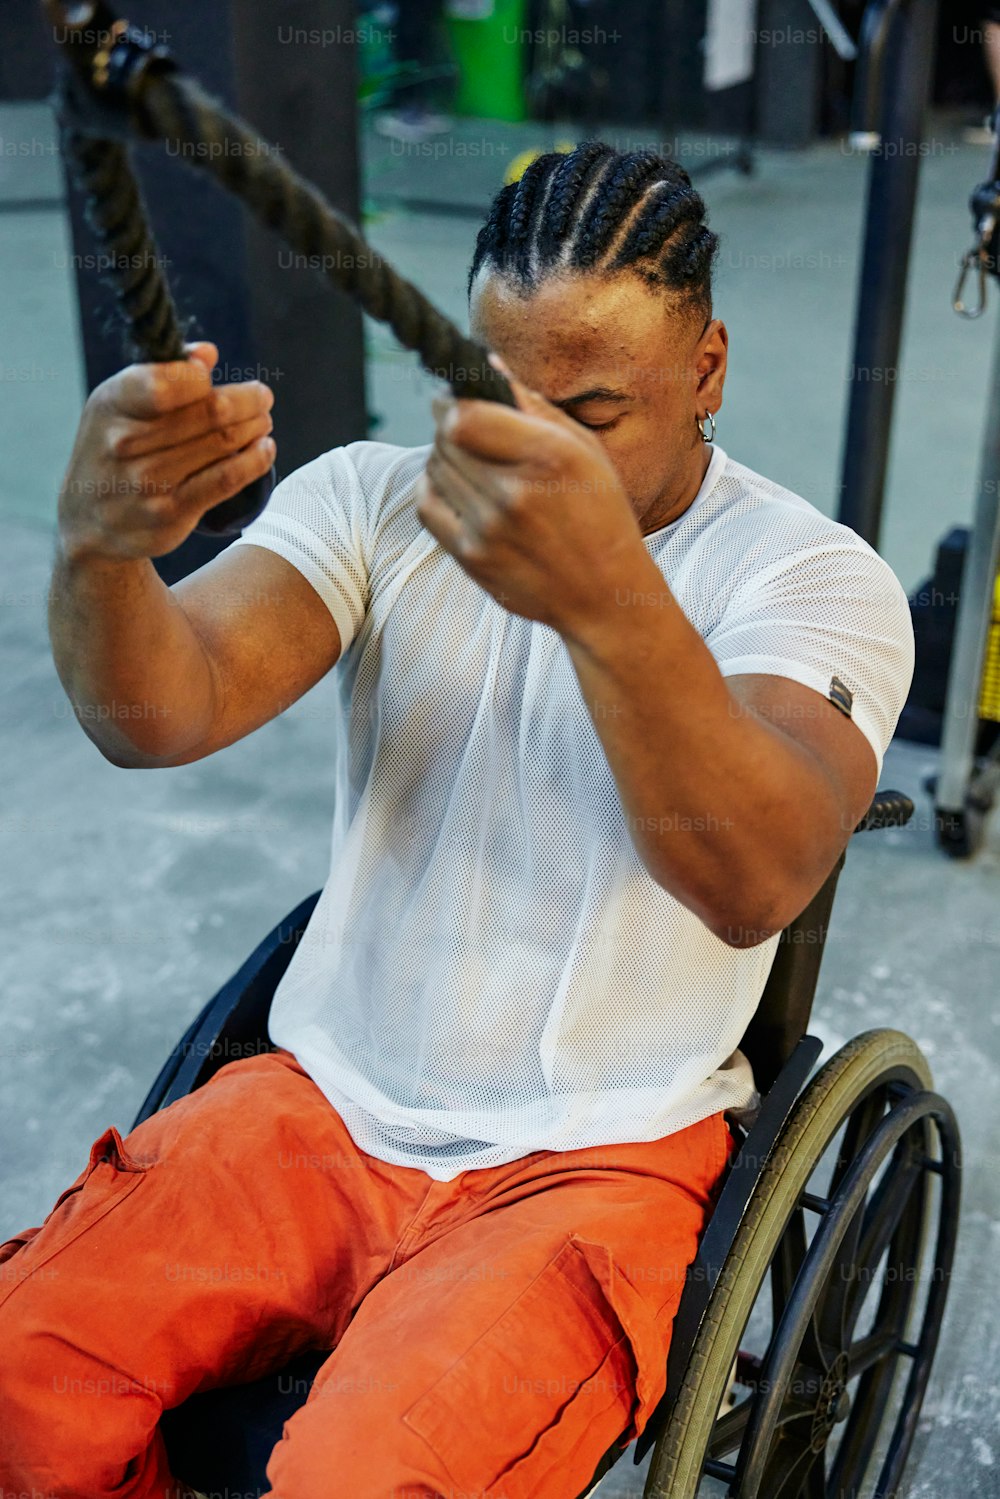 a person in a wheelchair holding a large sword